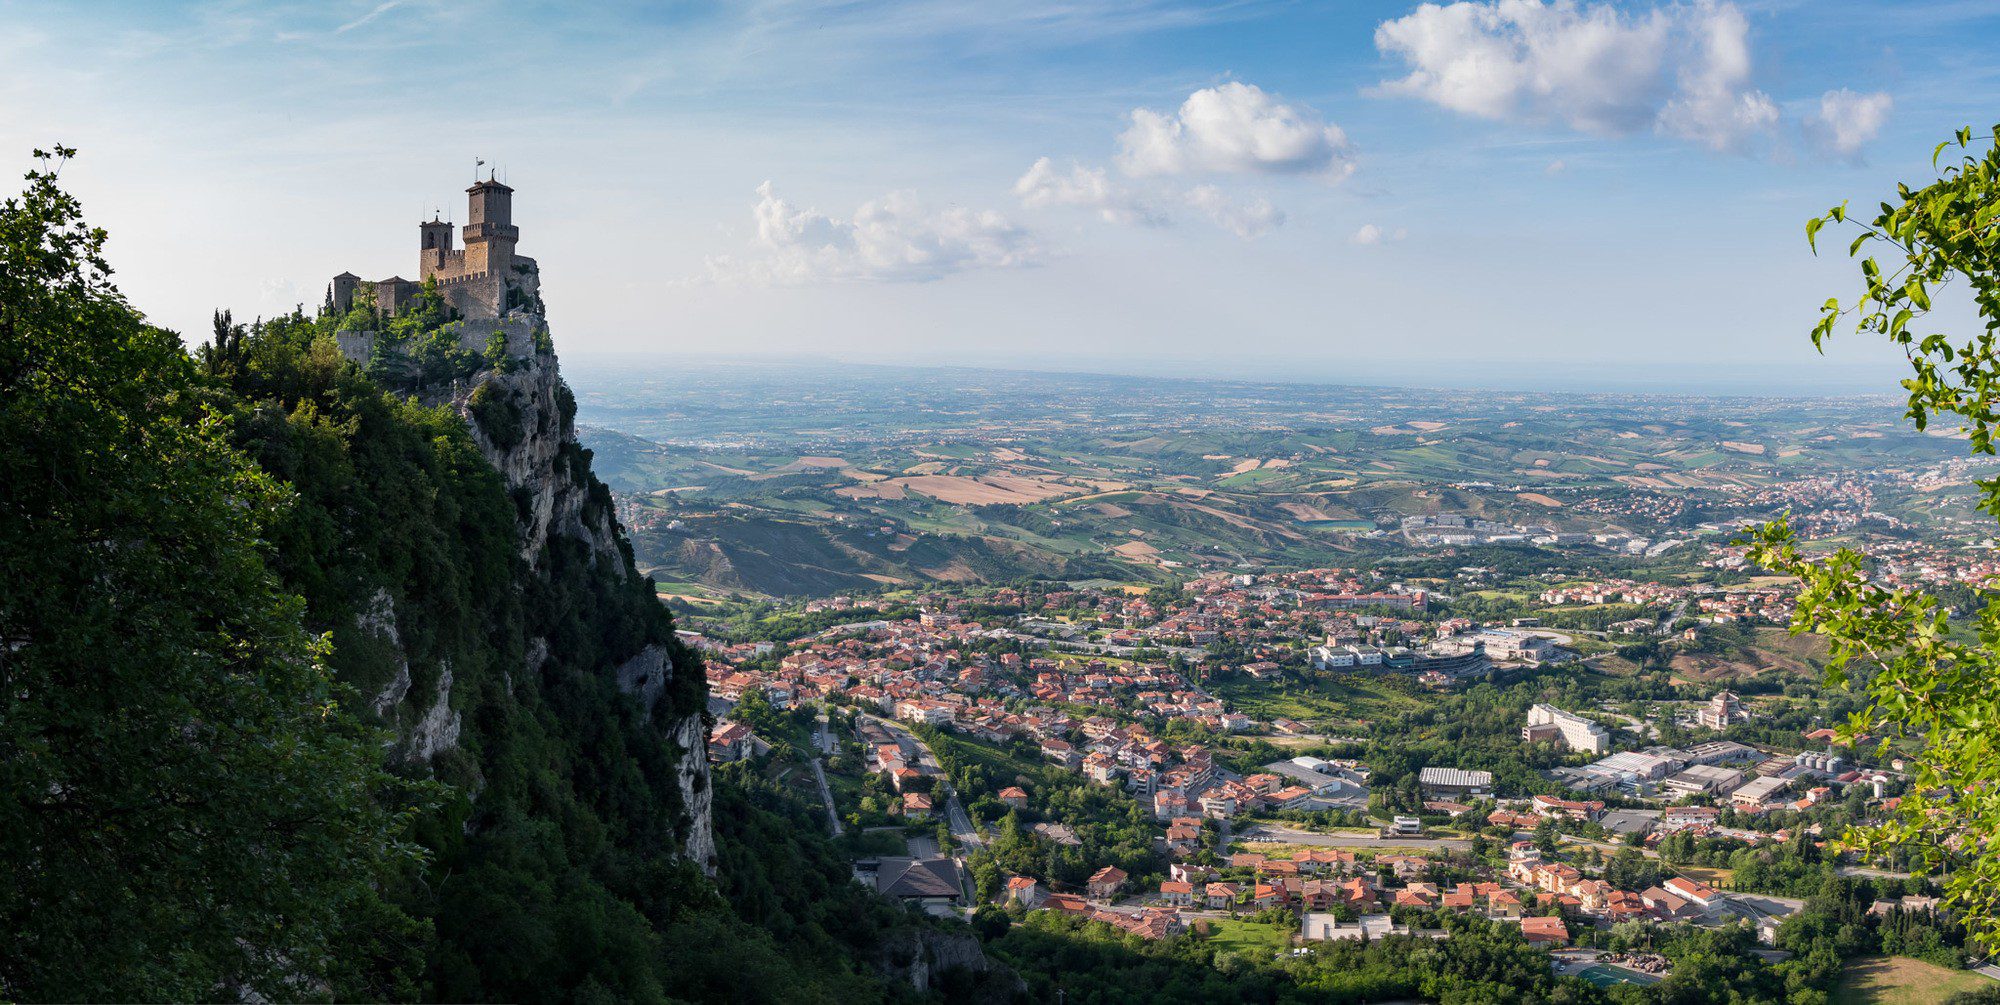 10 Reasons To Visit The City of San Marino – The Worlds Oldest Republic